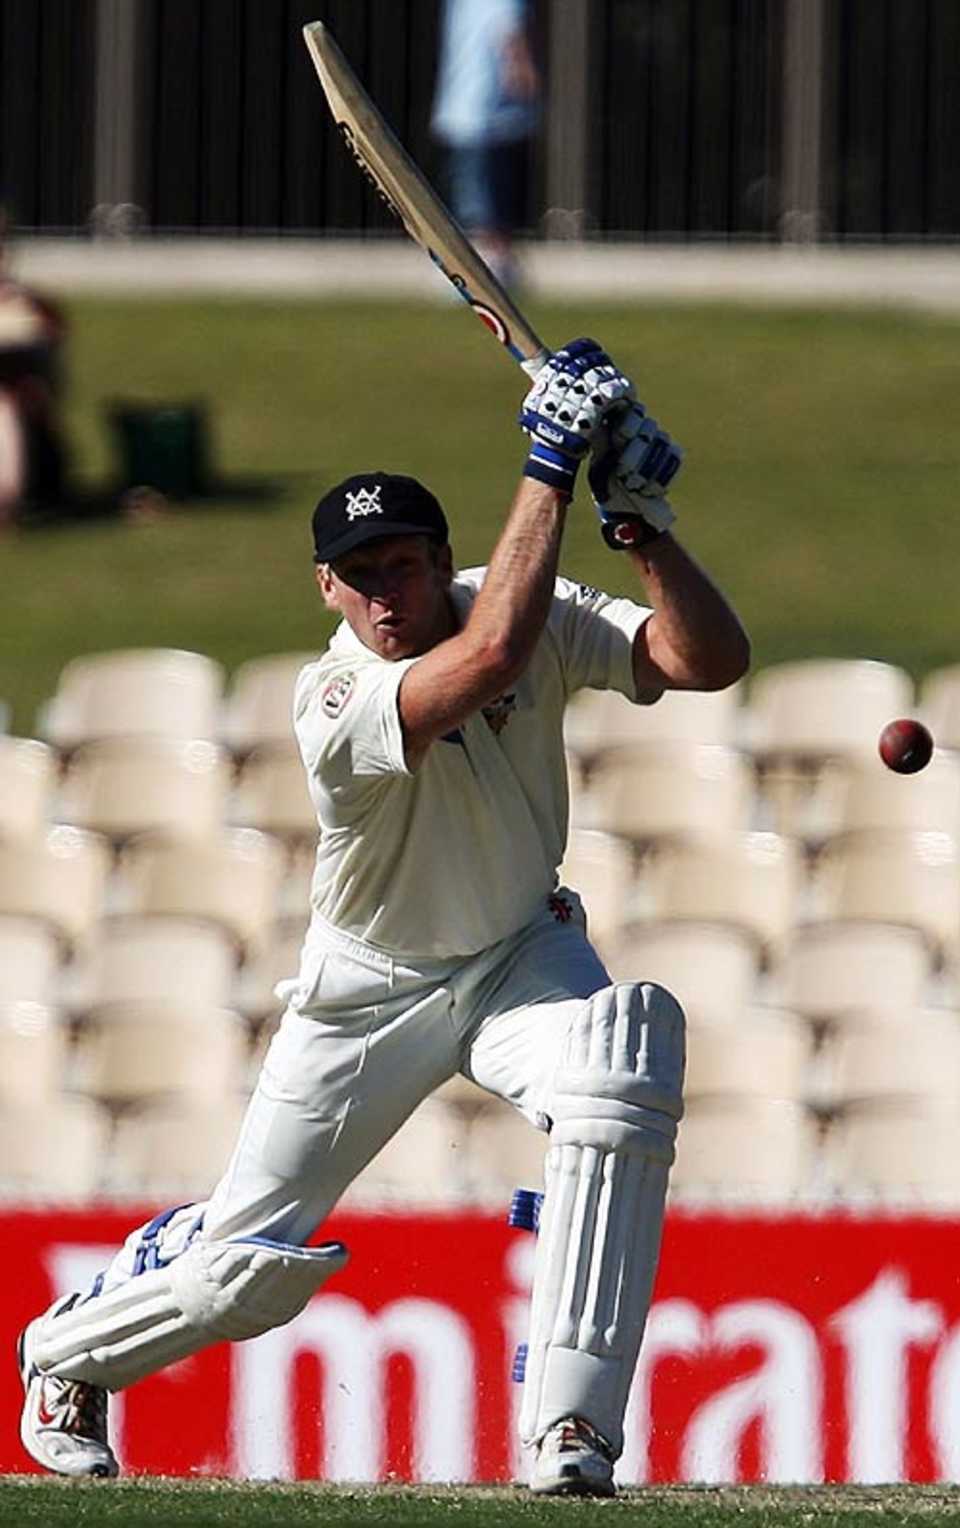 Cameron White drives on his way to 76, South Australia v Victoria, Pura Cup, Adelaide, October 14, 2007